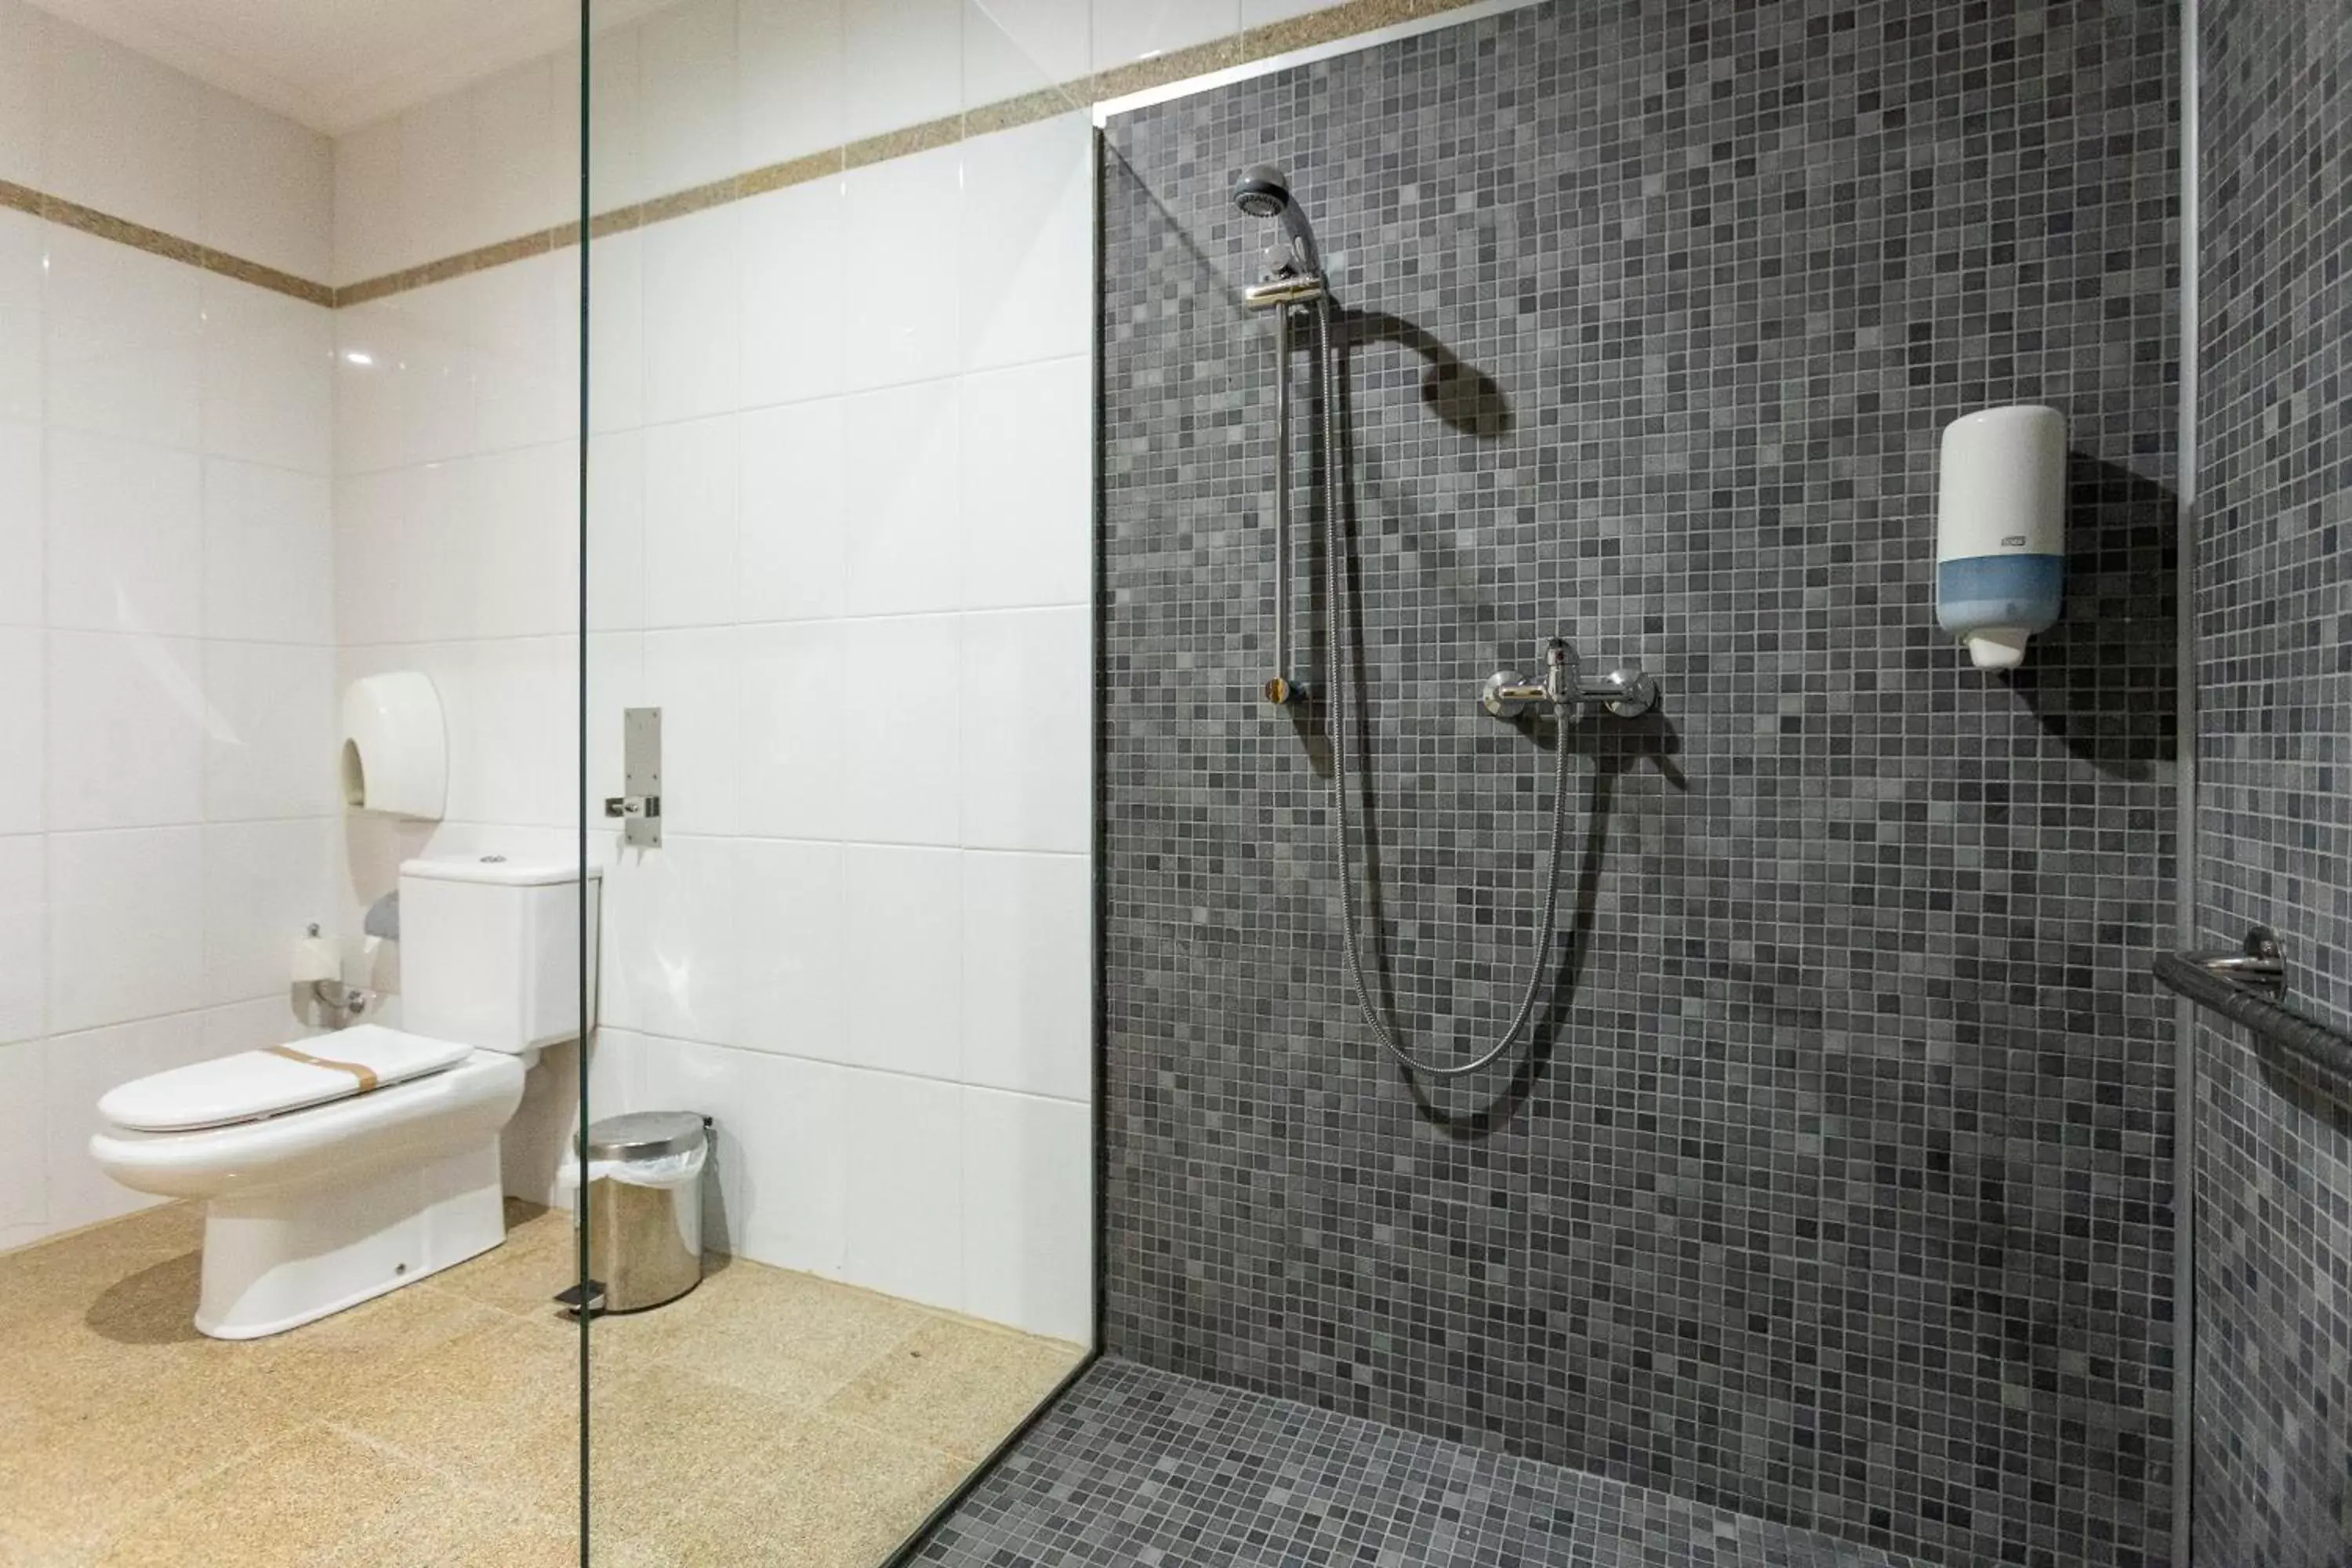 Facility for disabled guests, Bathroom in Hotel Alfonso I